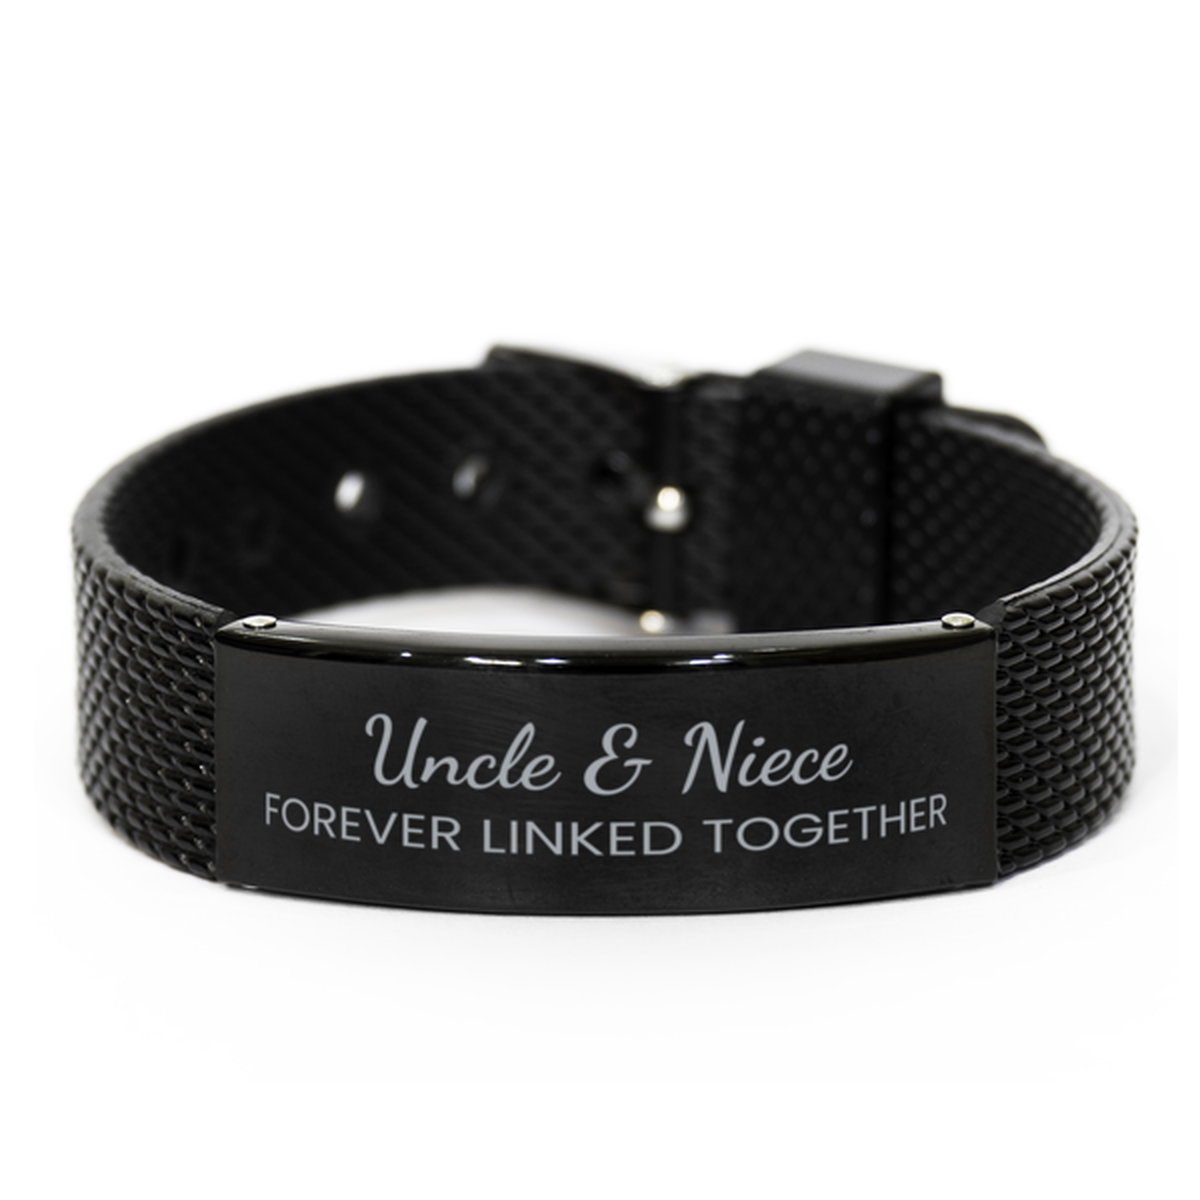 Uncle and Niece Forever Linked Together Bracelet, Uncle Niece Bracelet, Black Stainless Steel Leather Bracelet, Birthday, Christmas.